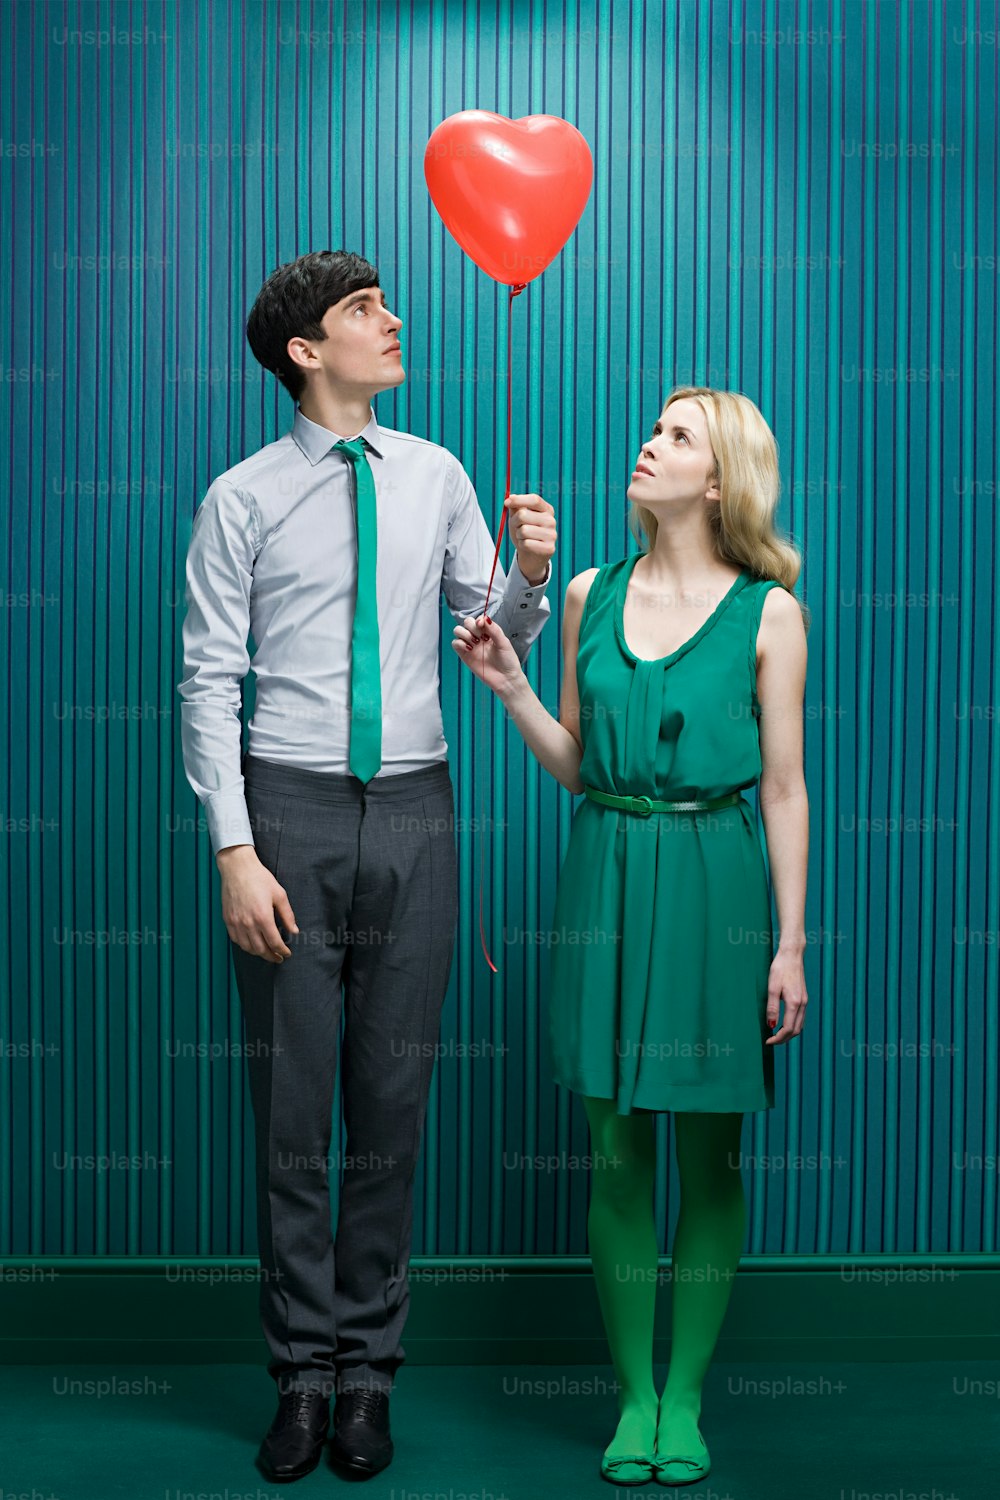 a man and a woman holding a red heart balloon